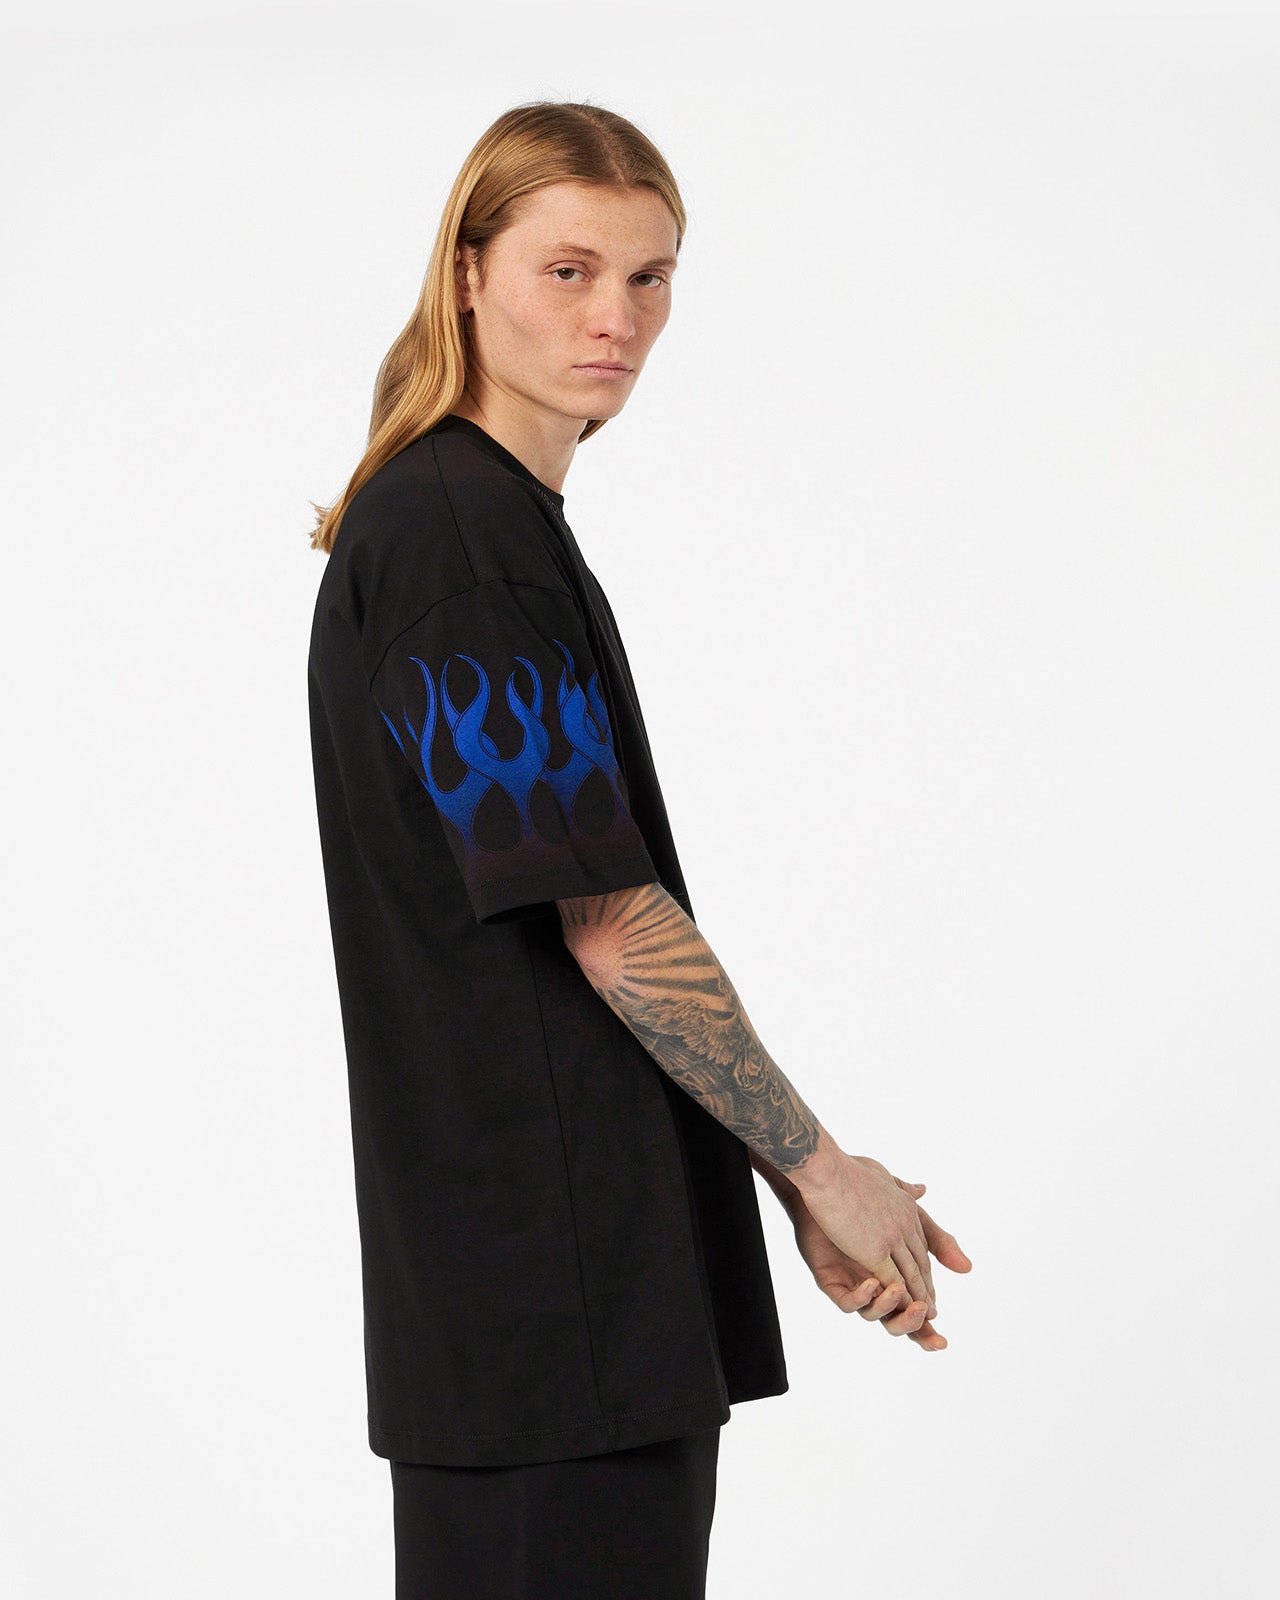 Black T-shirt with Blue Flames